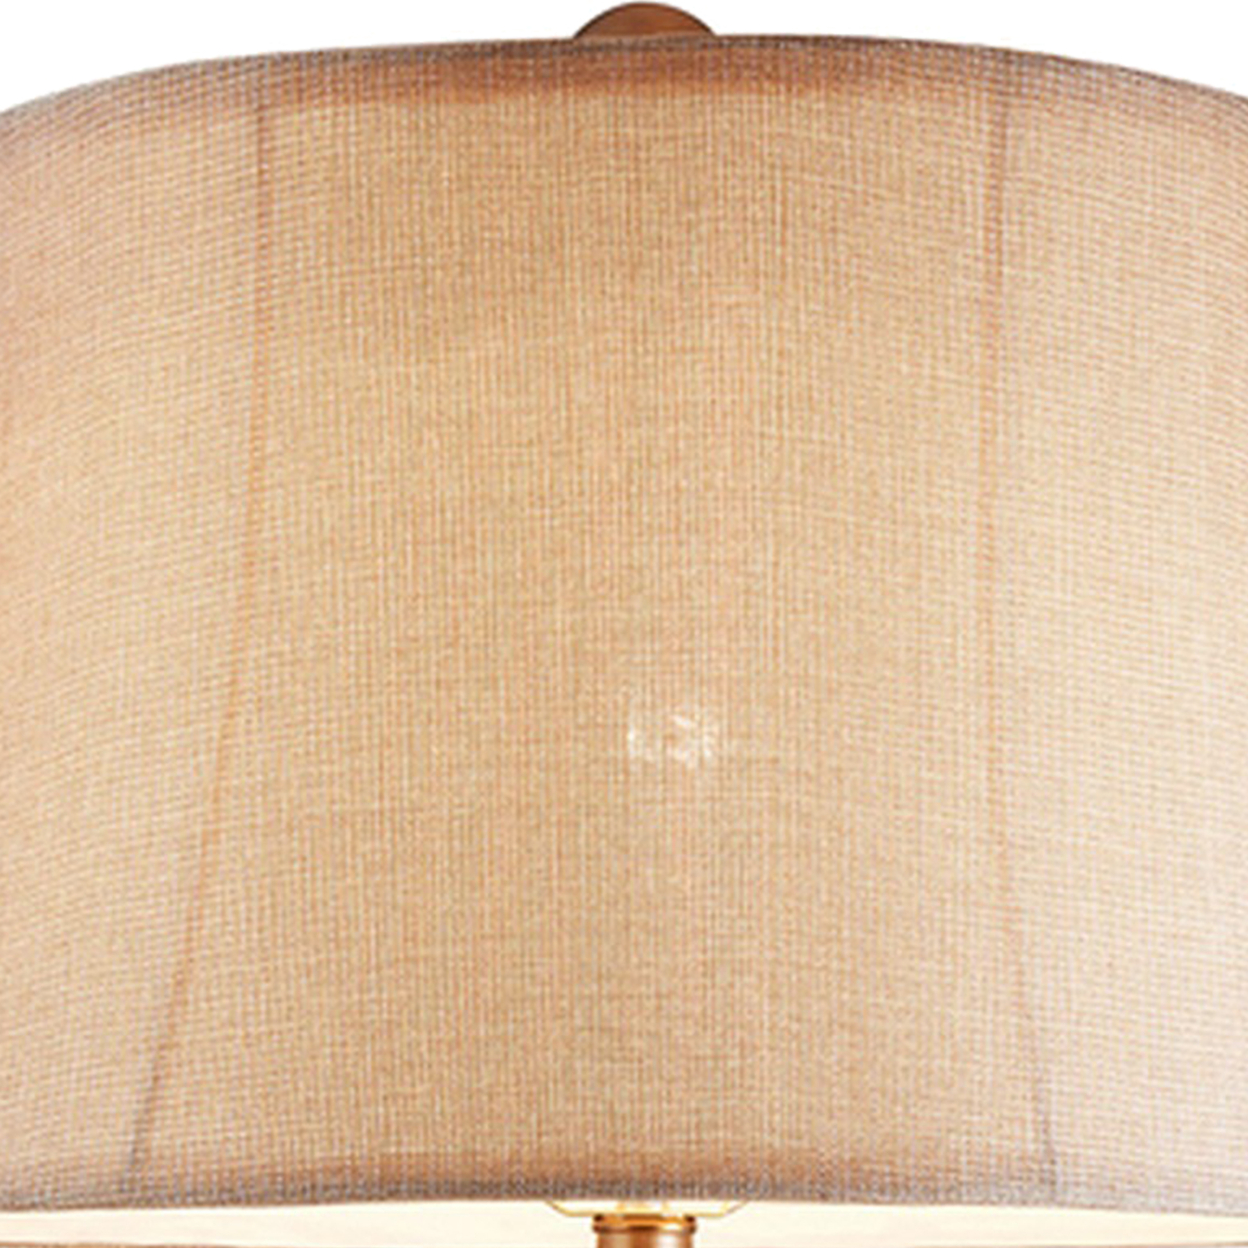 Table Lamp With Filigree Accent Base And Fabric Shade, Brown- Saltoro Sherpi